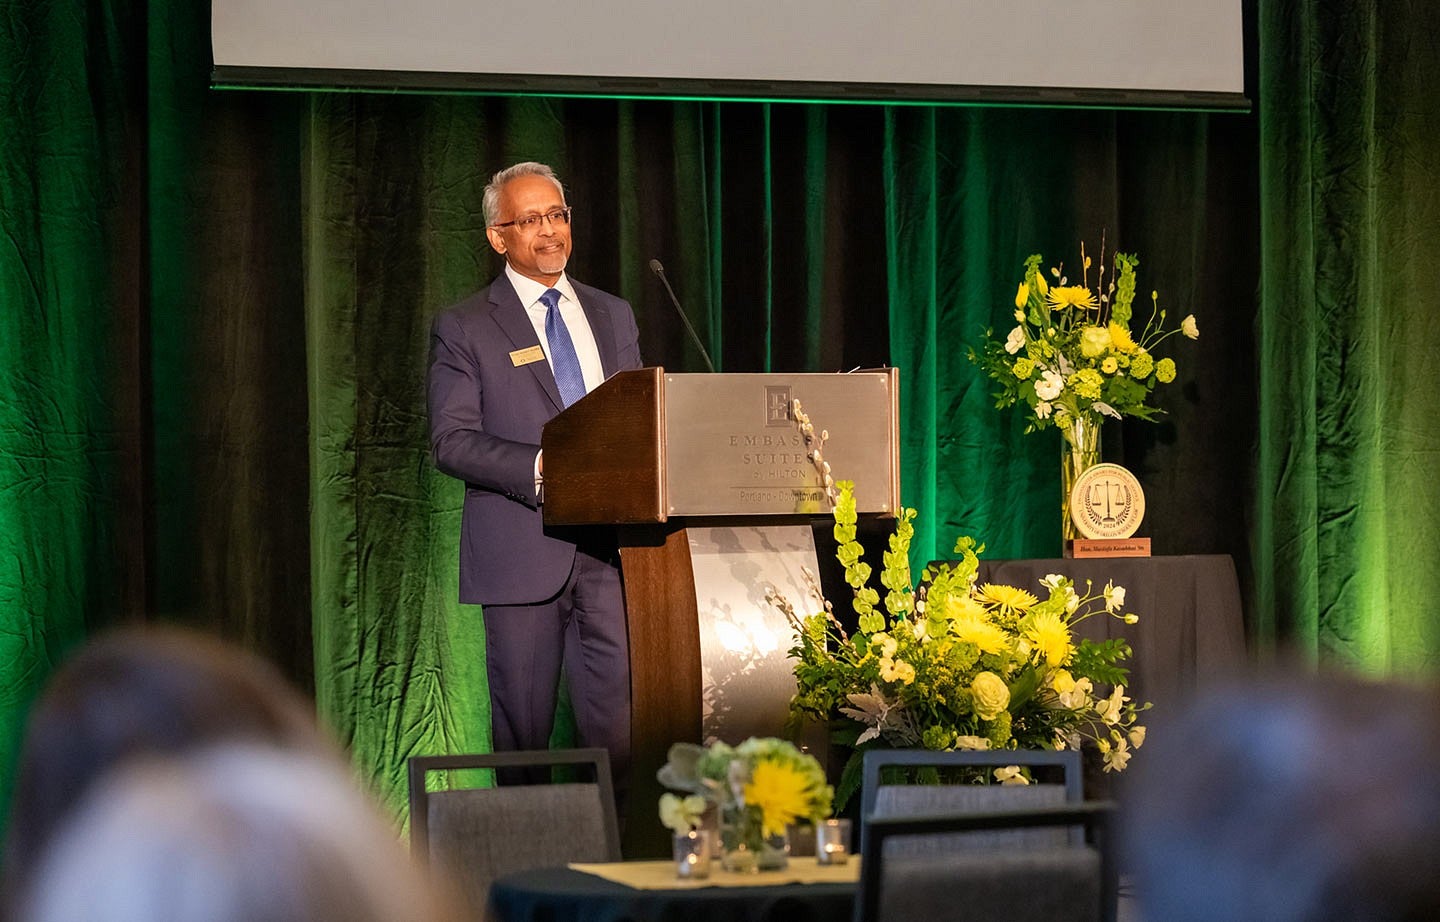 Judge Mustafa T. Kasubhai speaking at a podium on stage before an audience with a green curtain behind him for the Frohnmayer Awards ceremony.